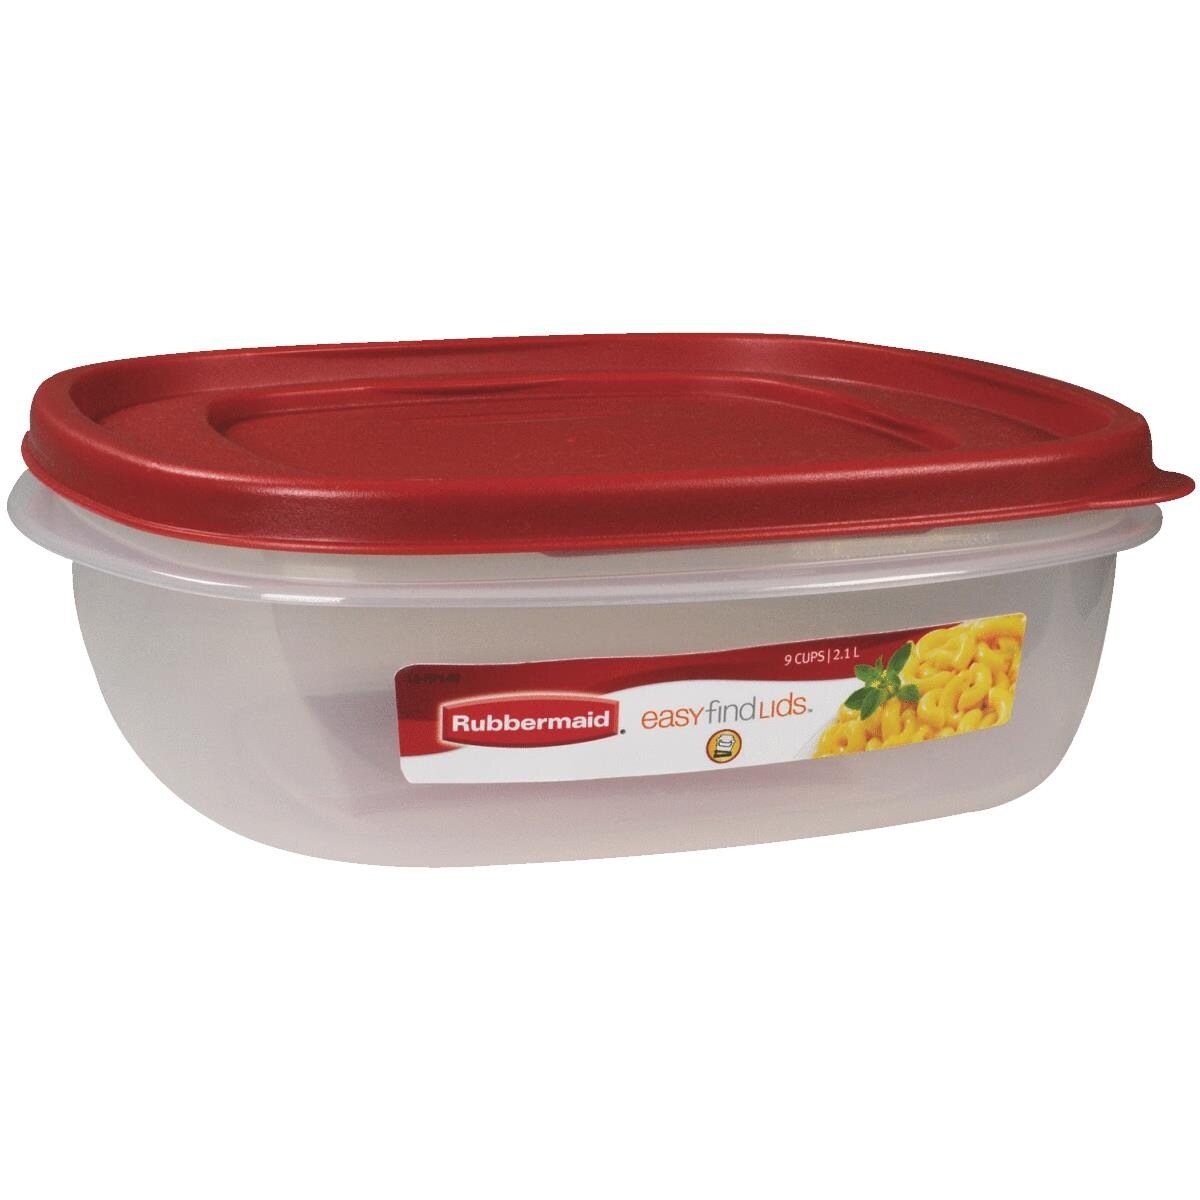 https://ak1.ostkcdn.com/images/products/is/images/direct/ba5c5bc612b80158eaacc815fbfd2dd302b3f0da/Rubbermaid-9-Cup-Food-Container.jpg